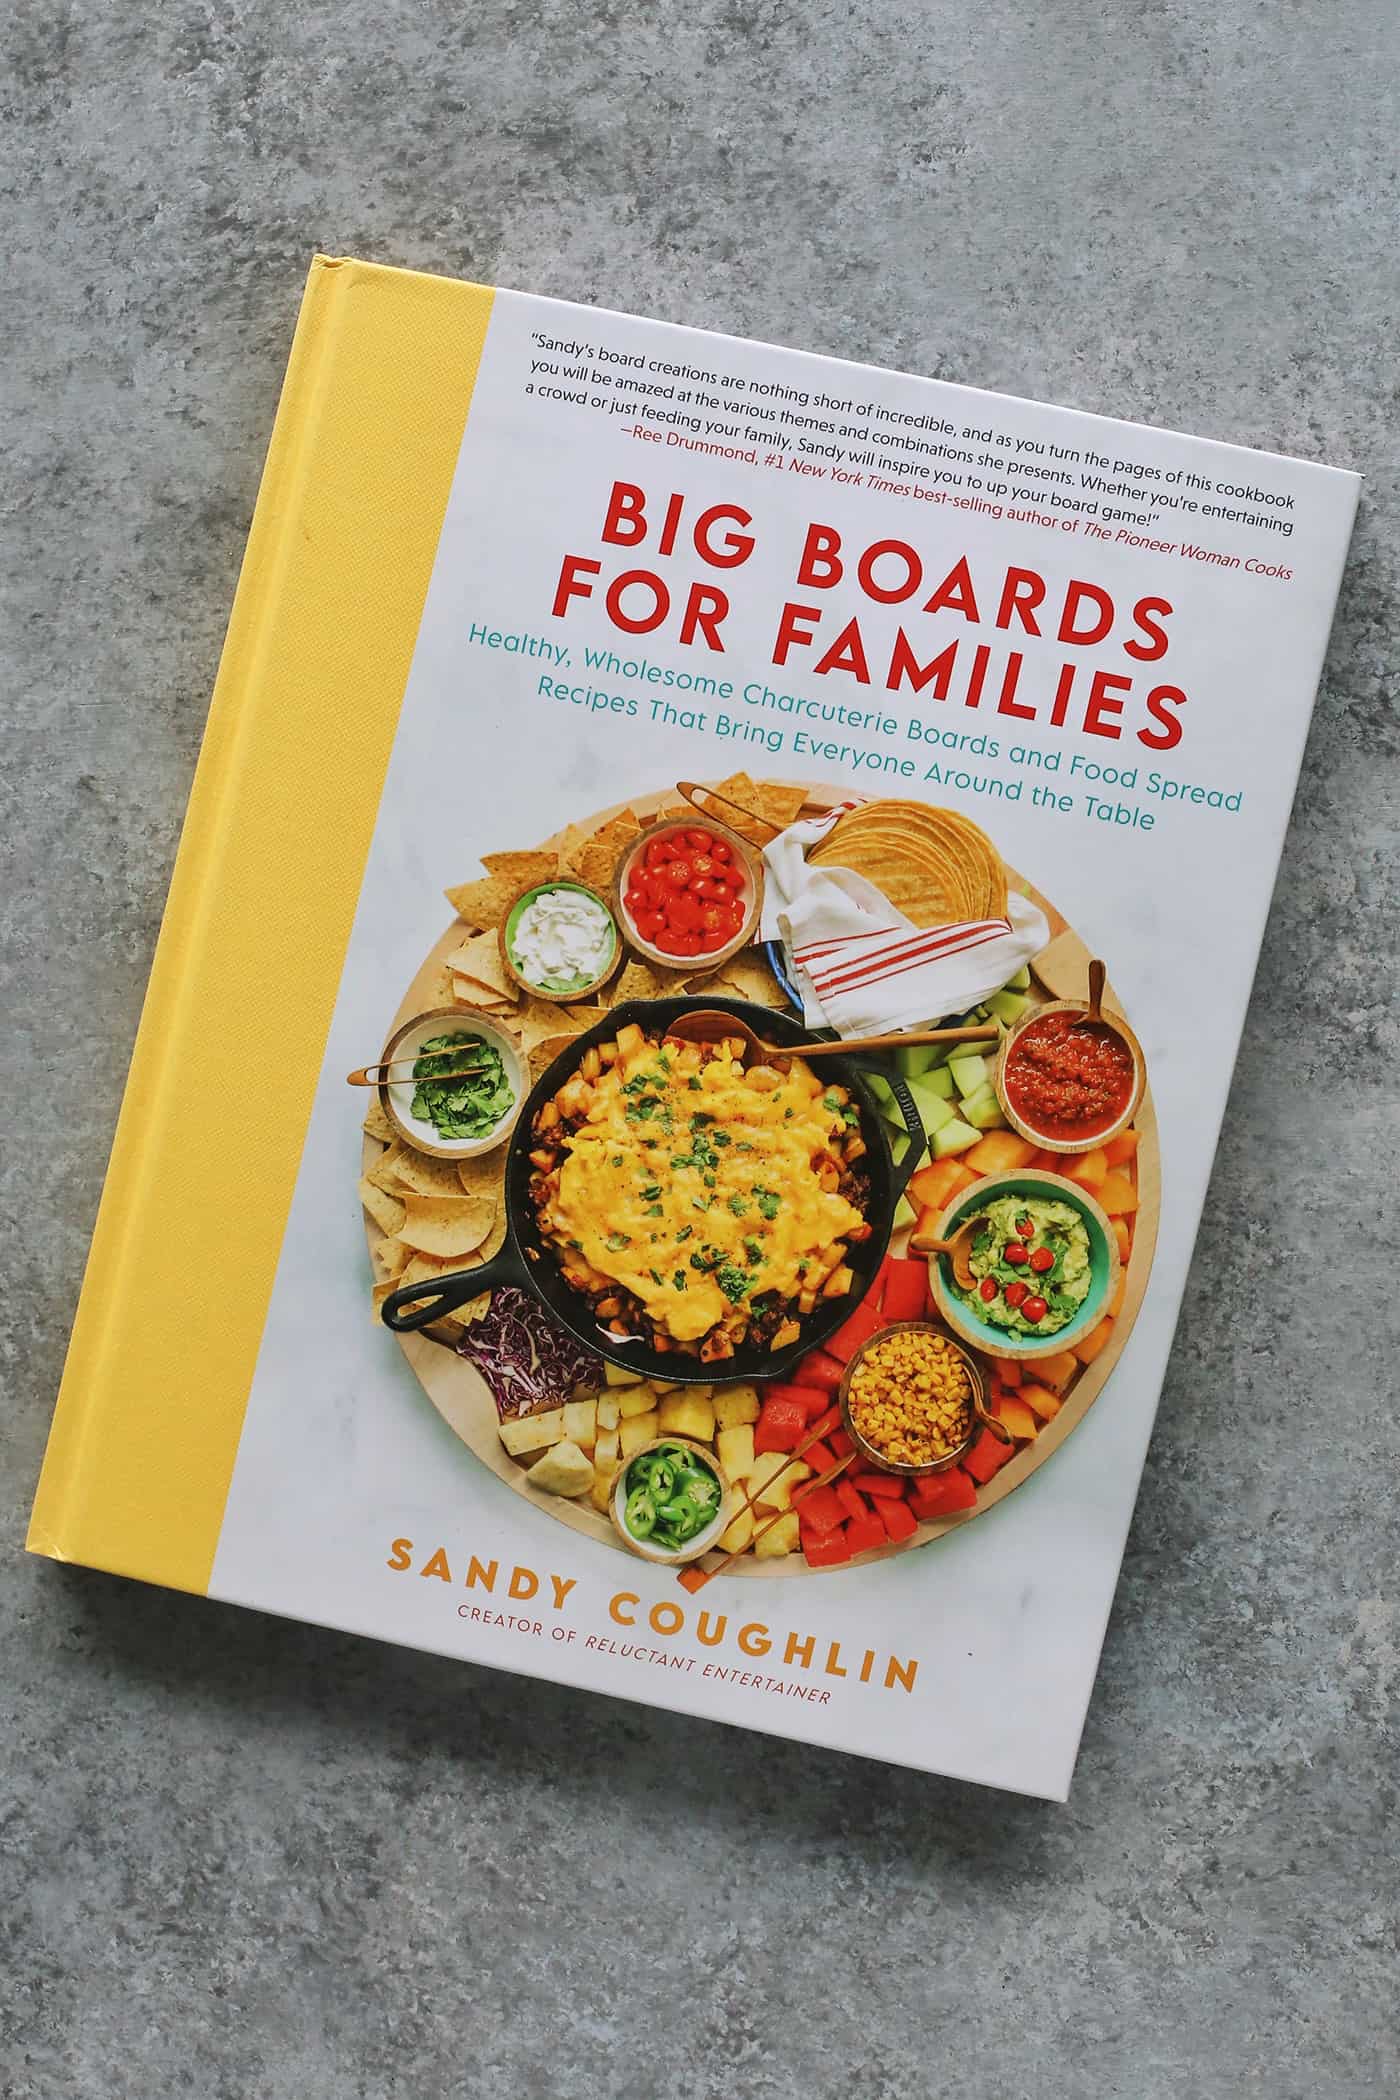 Big Boards For Families book by Sandy Coughlin